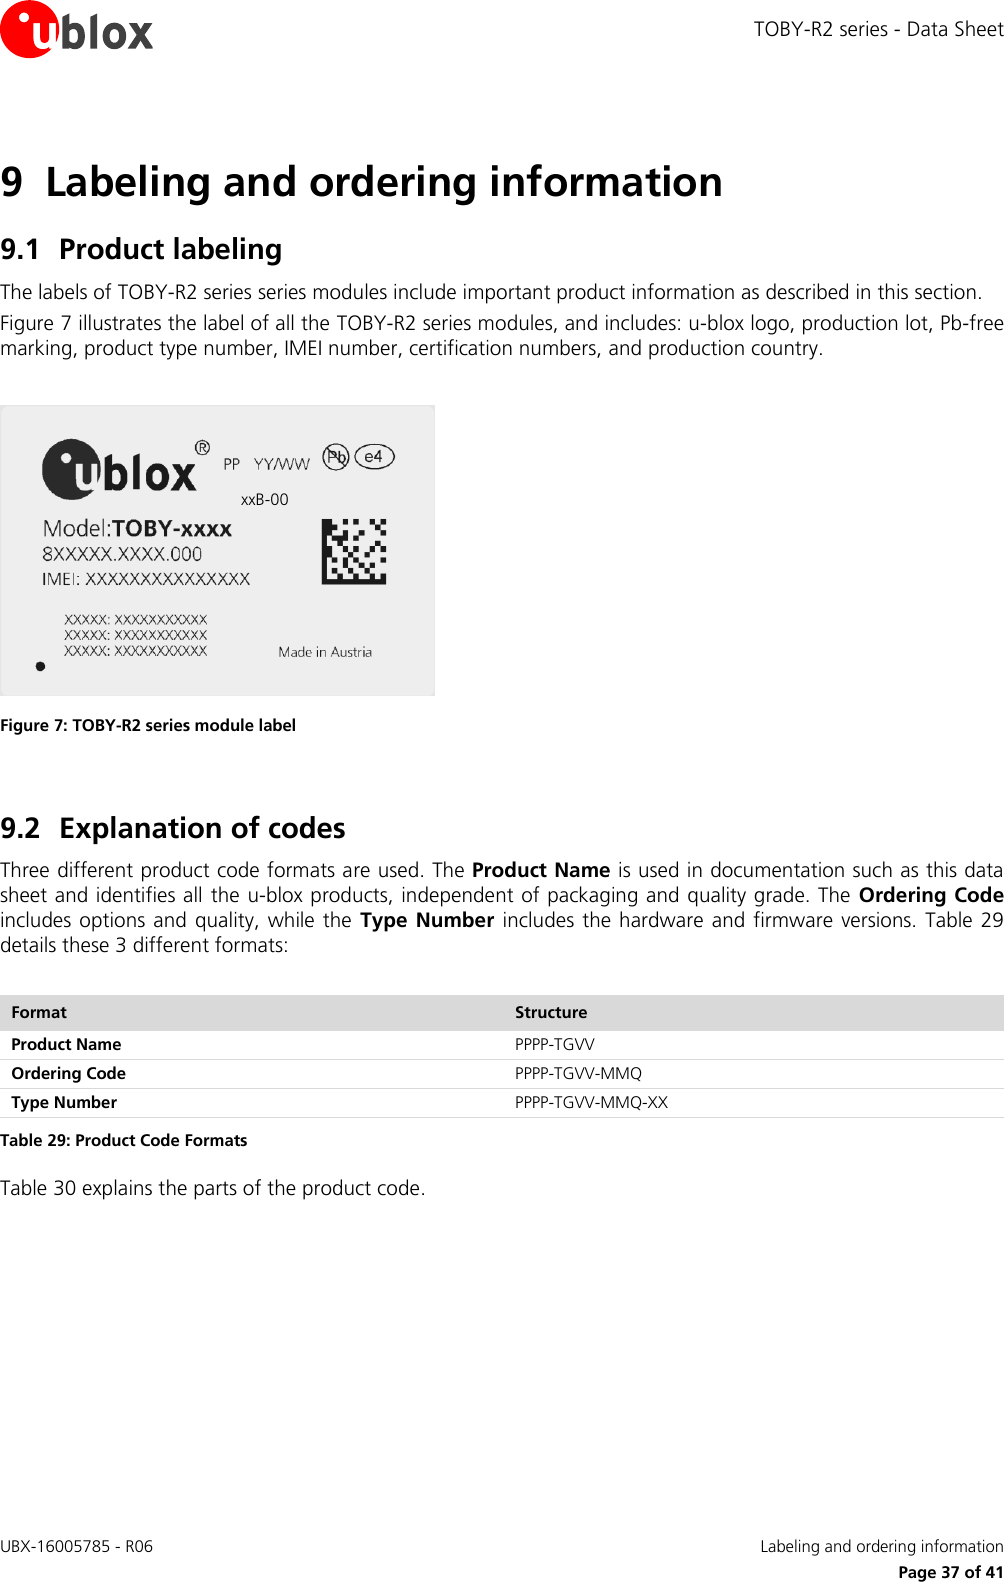 TOBY-R2 series - Data Sheet UBX-16005785 - R06    Labeling and ordering information   Page 37 of 41 9 Labeling and ordering information 9.1 Product labeling The labels of TOBY-R2 series series modules include important product information as described in this section. Figure 7 illustrates the label of all the TOBY-R2 series modules, and includes: u-blox logo, production lot, Pb-free marking, product type number, IMEI number, certification numbers, and production country.  1588xxB-00 Figure 7: TOBY-R2 series module label  9.2 Explanation of codes Three different product code formats are used. The Product Name is used in documentation such as this data sheet and identifies all the u-blox products, independent of packaging and quality grade. The Ordering Code includes options and  quality, while the  Type  Number  includes the  hardware  and firmware versions. Table 29 details these 3 different formats:  Format Structure Product Name PPPP-TGVV Ordering Code PPPP-TGVV-MMQ Type Number PPPP-TGVV-MMQ-XX Table 29: Product Code Formats Table 30 explains the parts of the product code.  